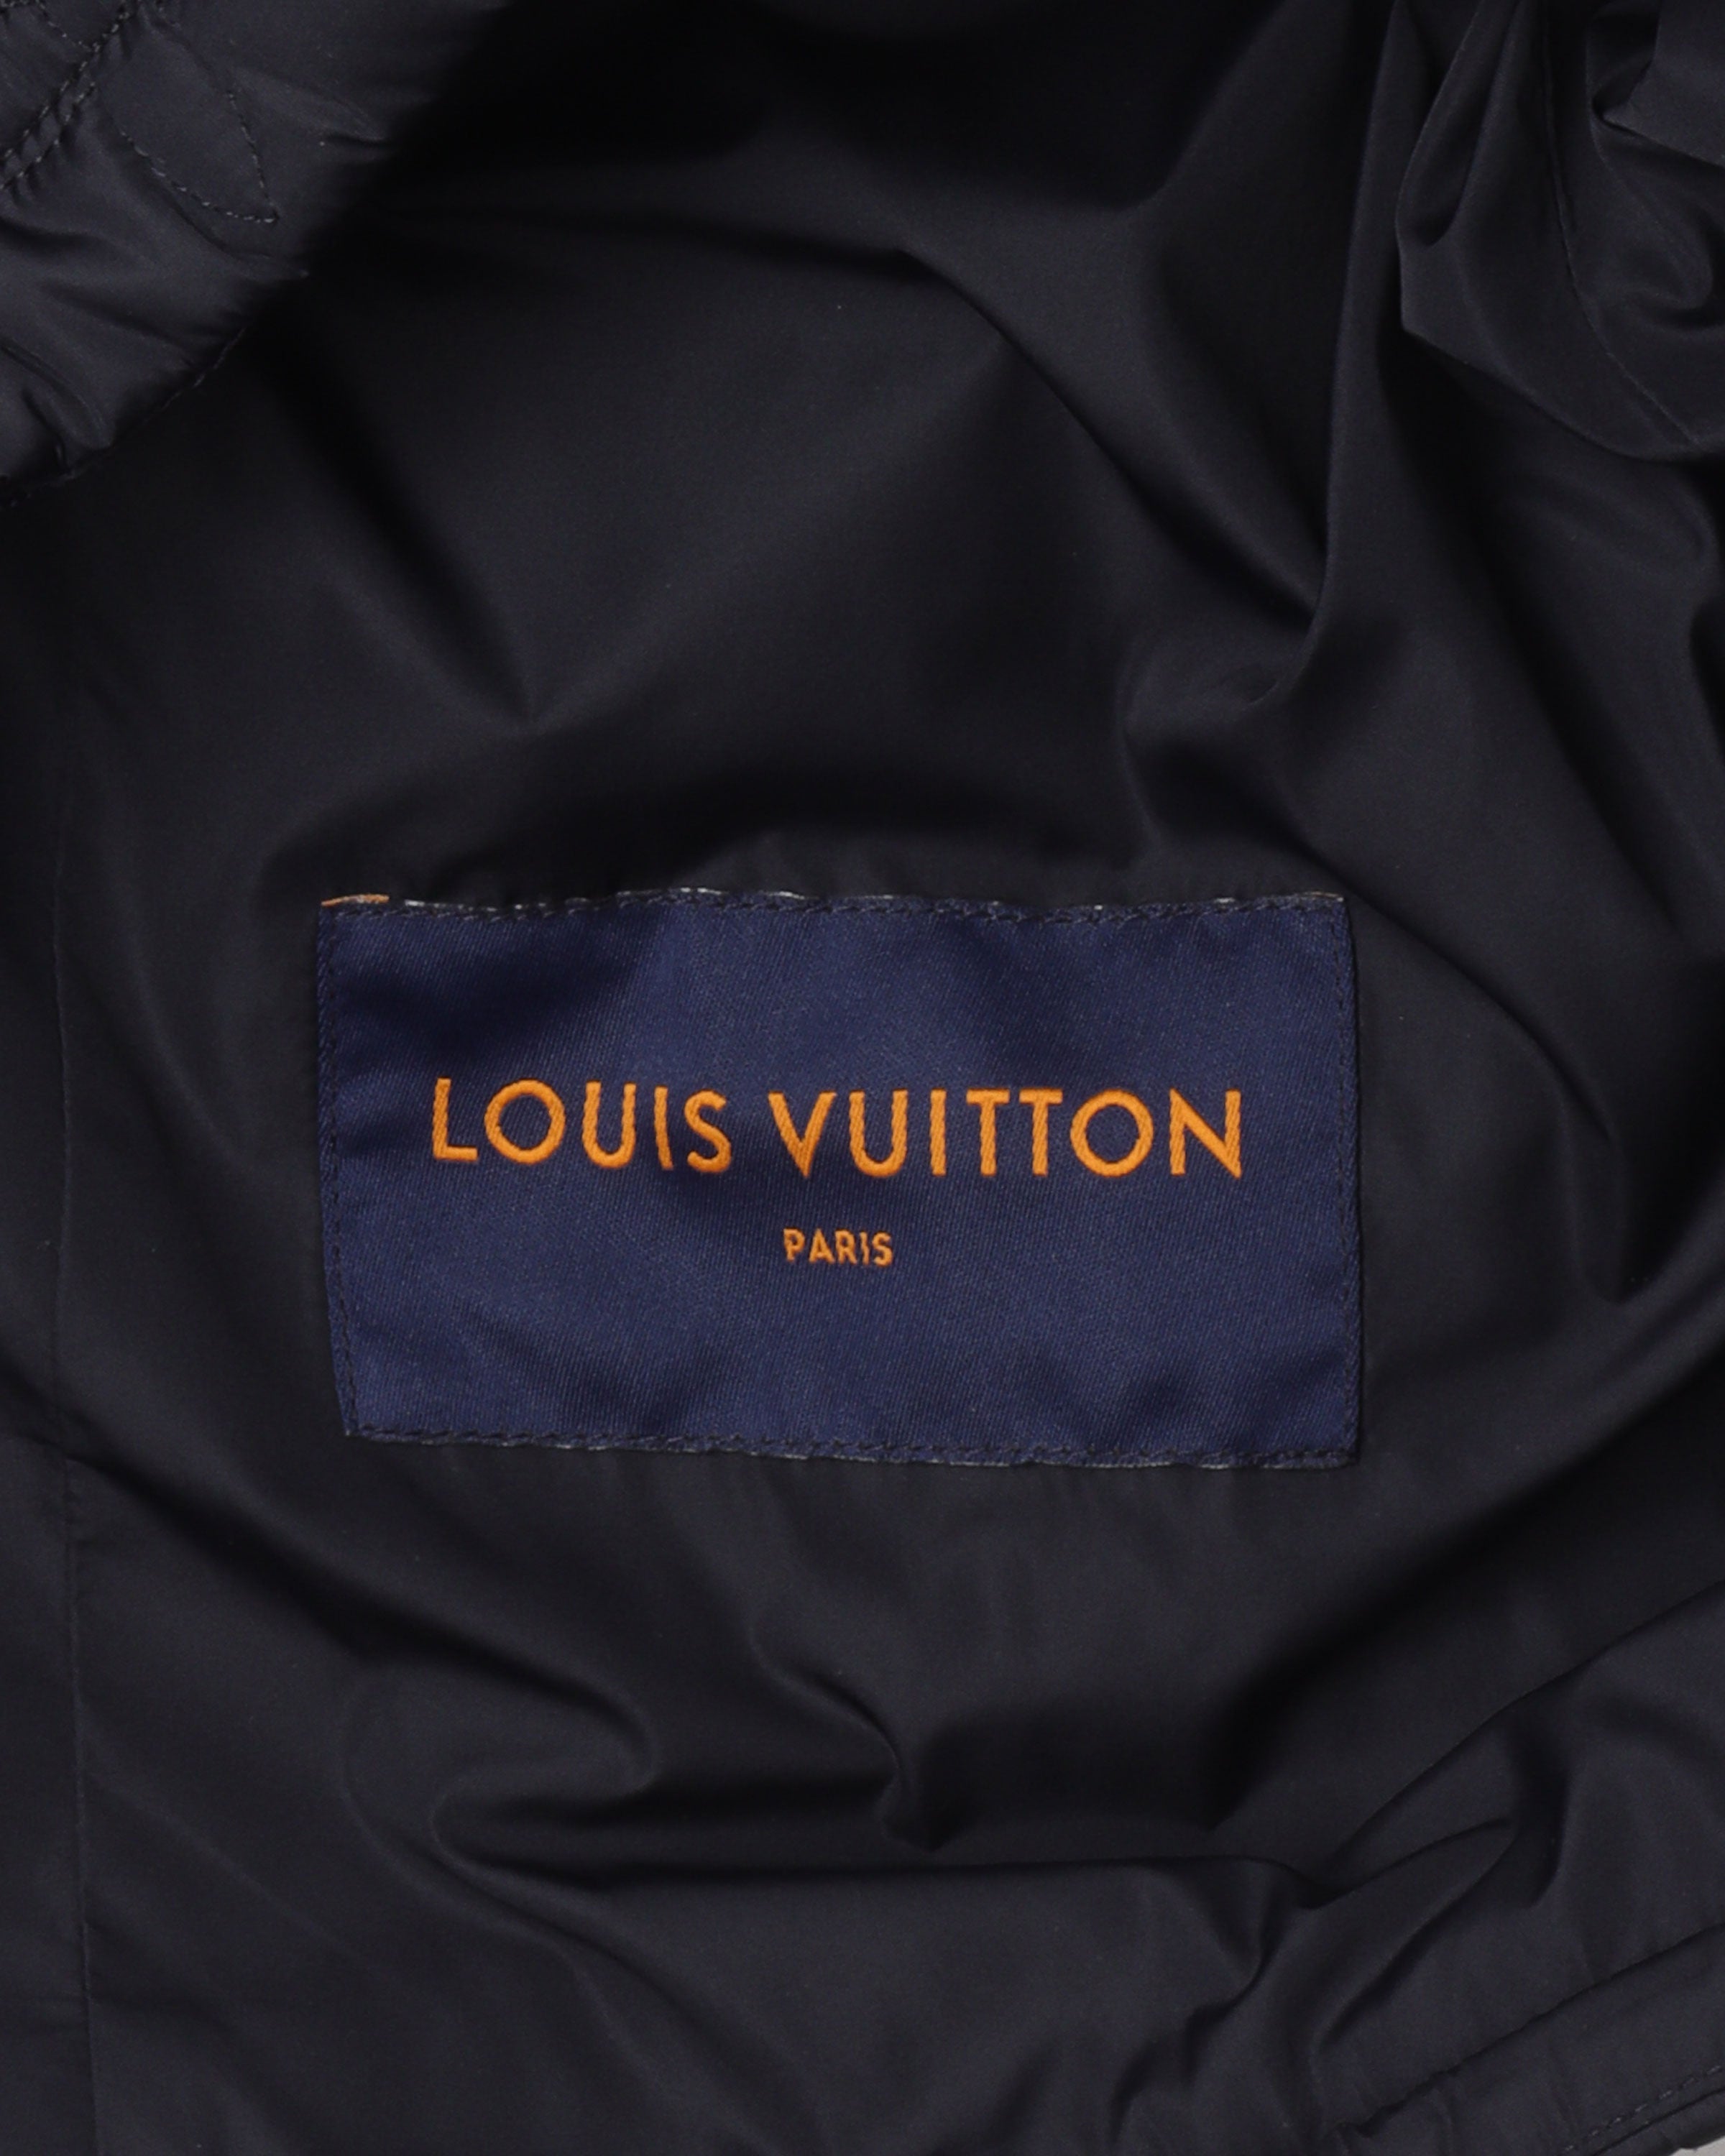 KIDS LOUIS VUITTON WHITE PUFFER JACKET SIZE 16/17 - Able Auctions